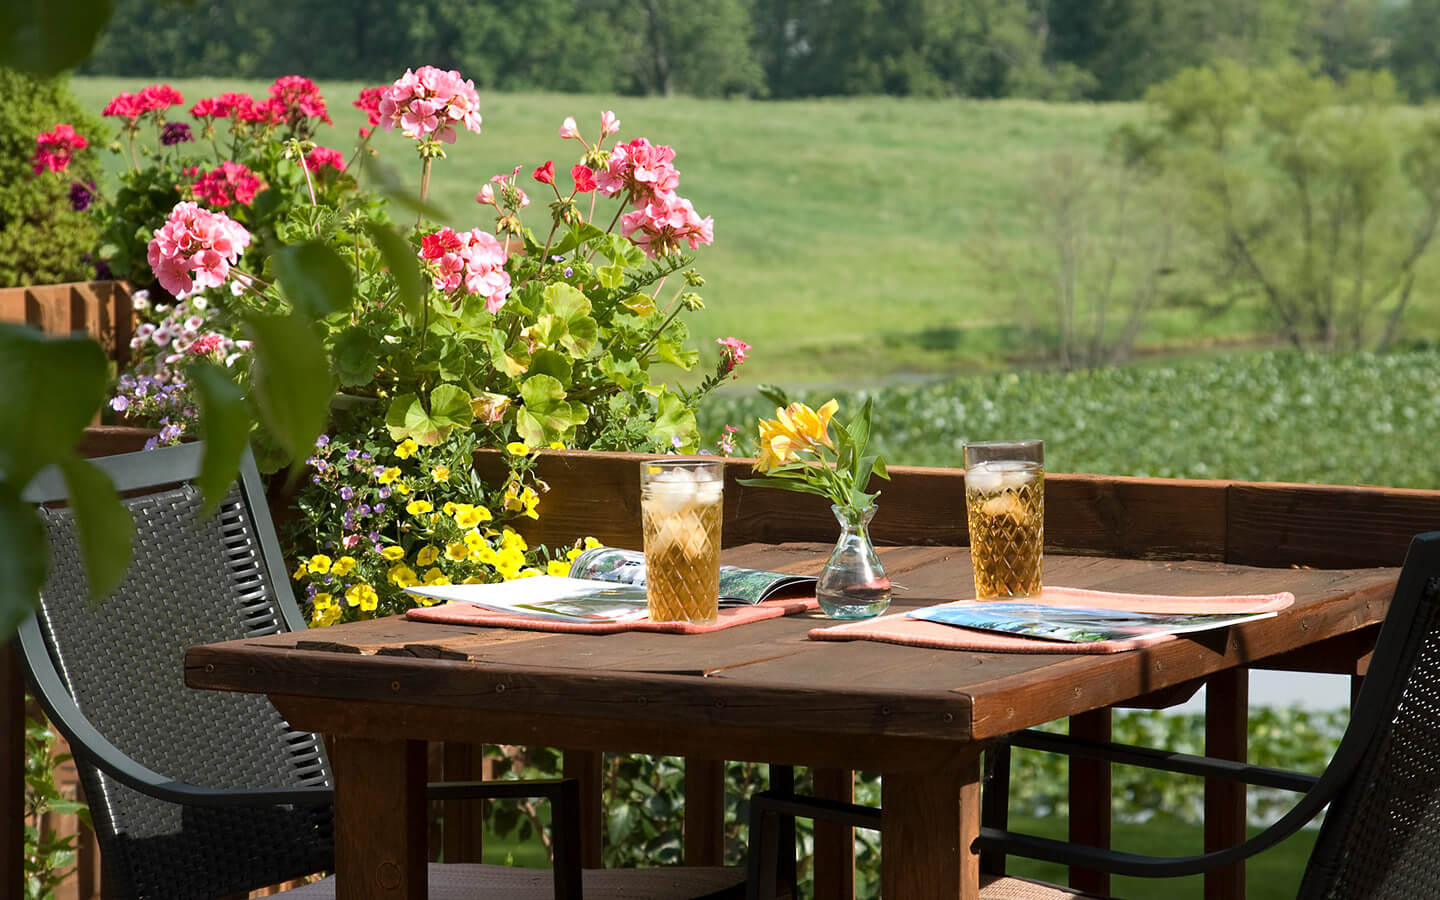 Cold drinks on deck table with flowers